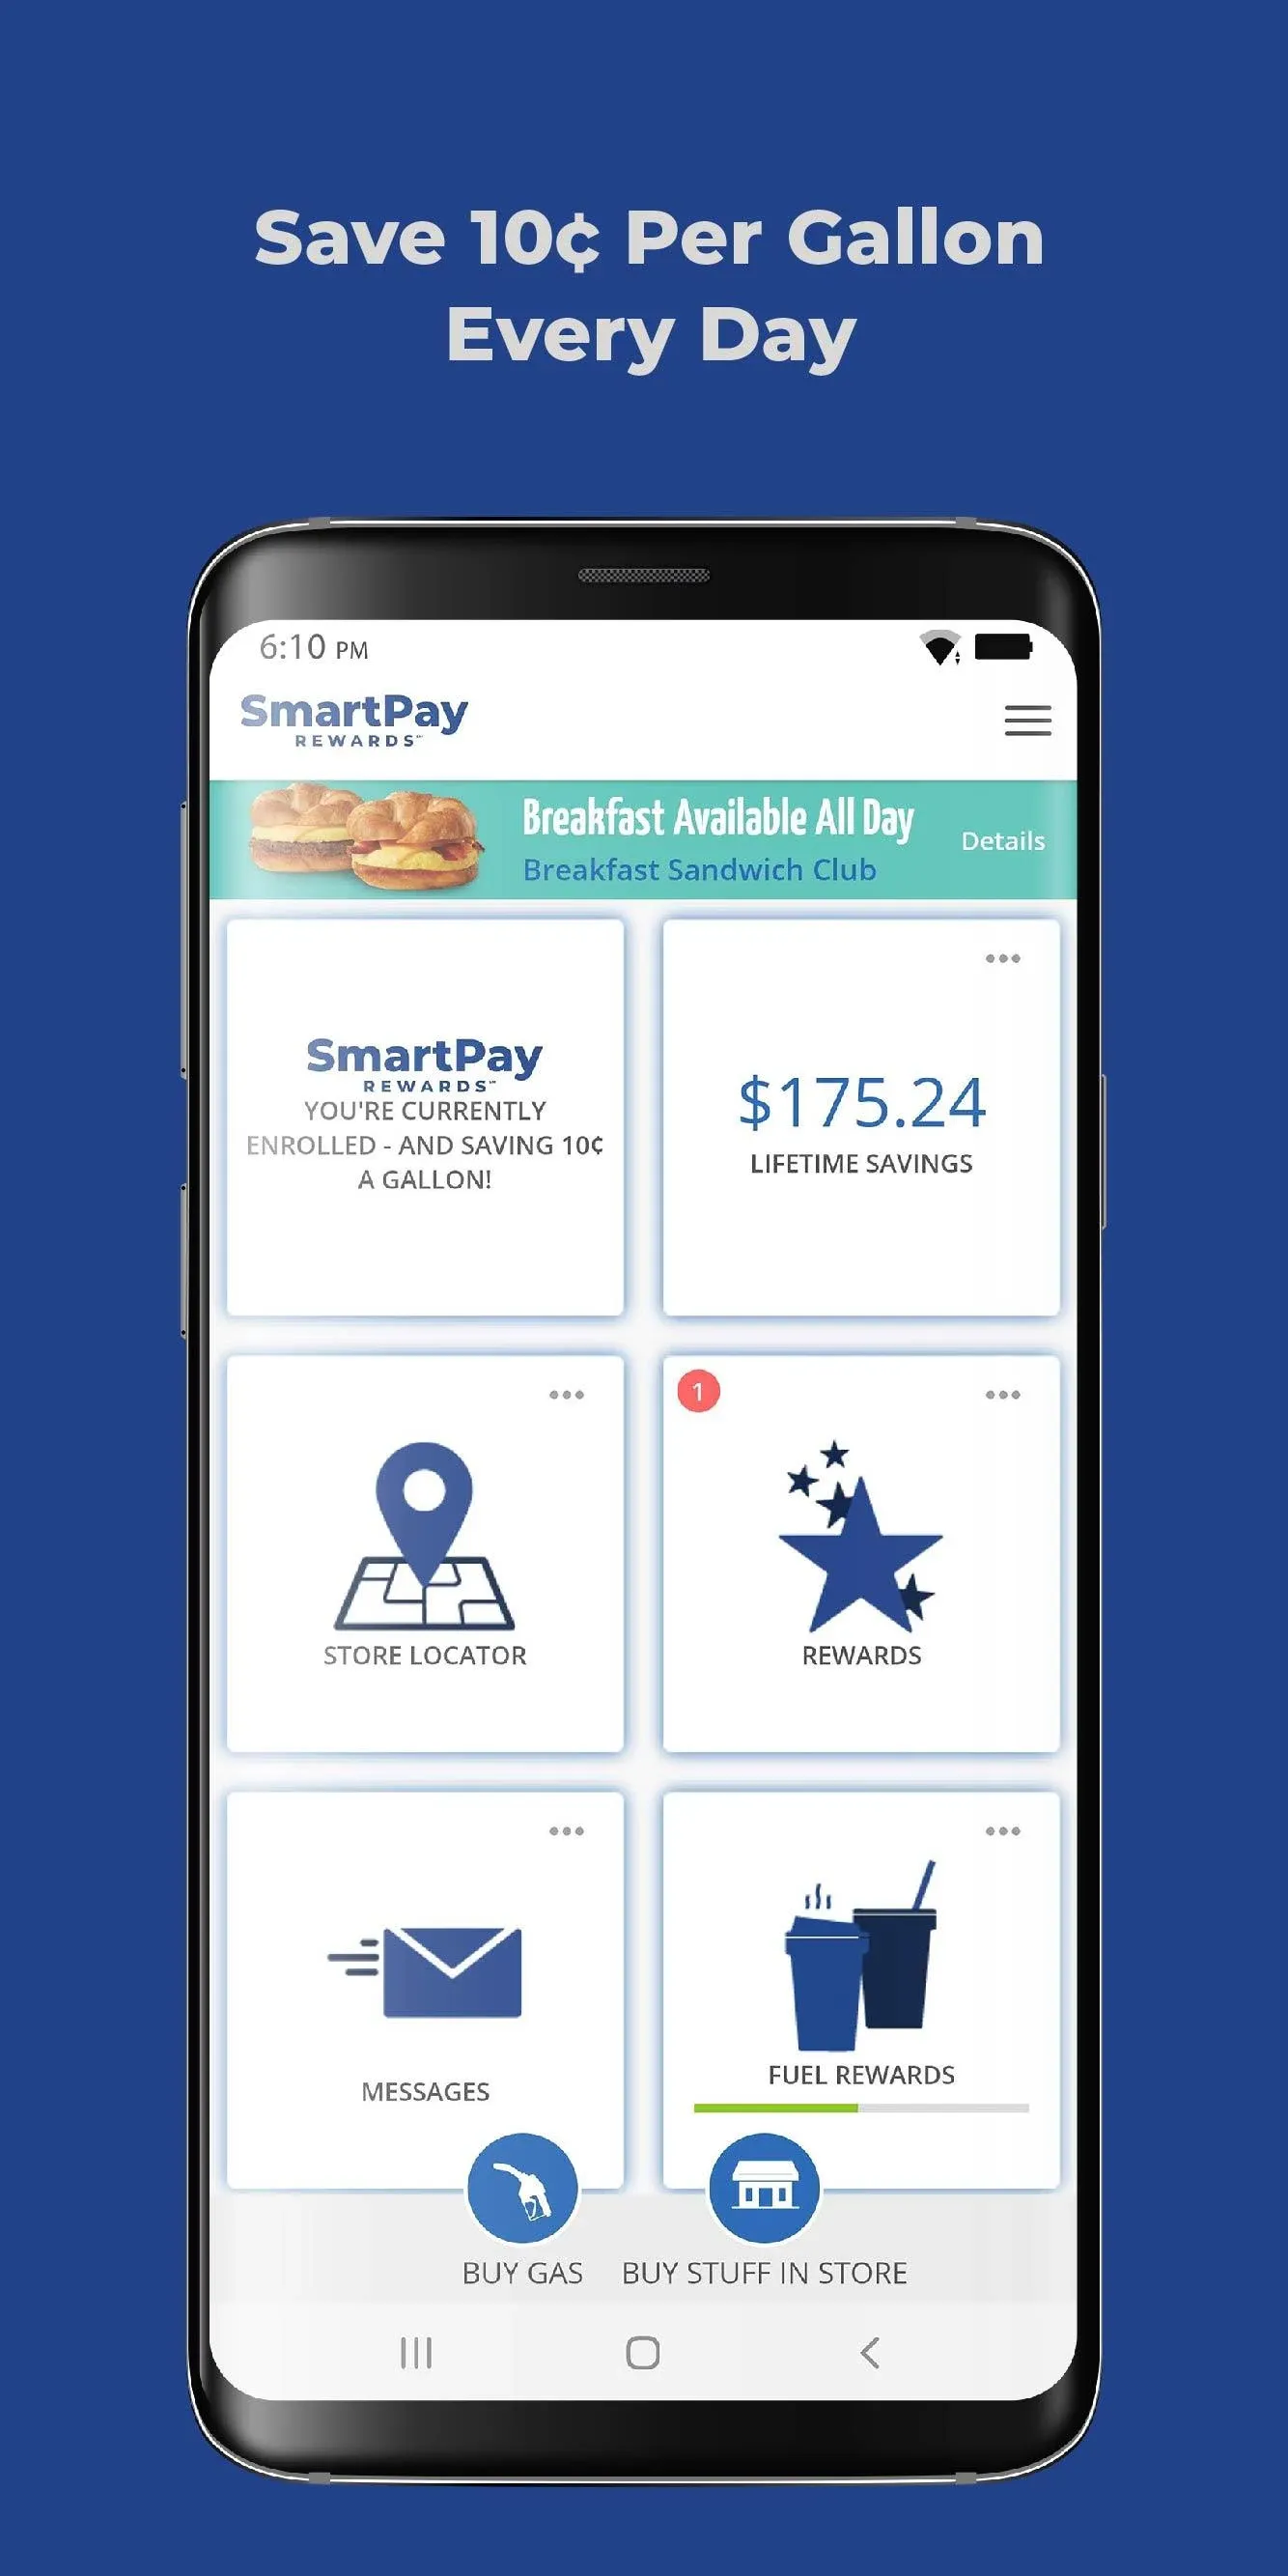 An image of the SmartPay Rewards app home screen